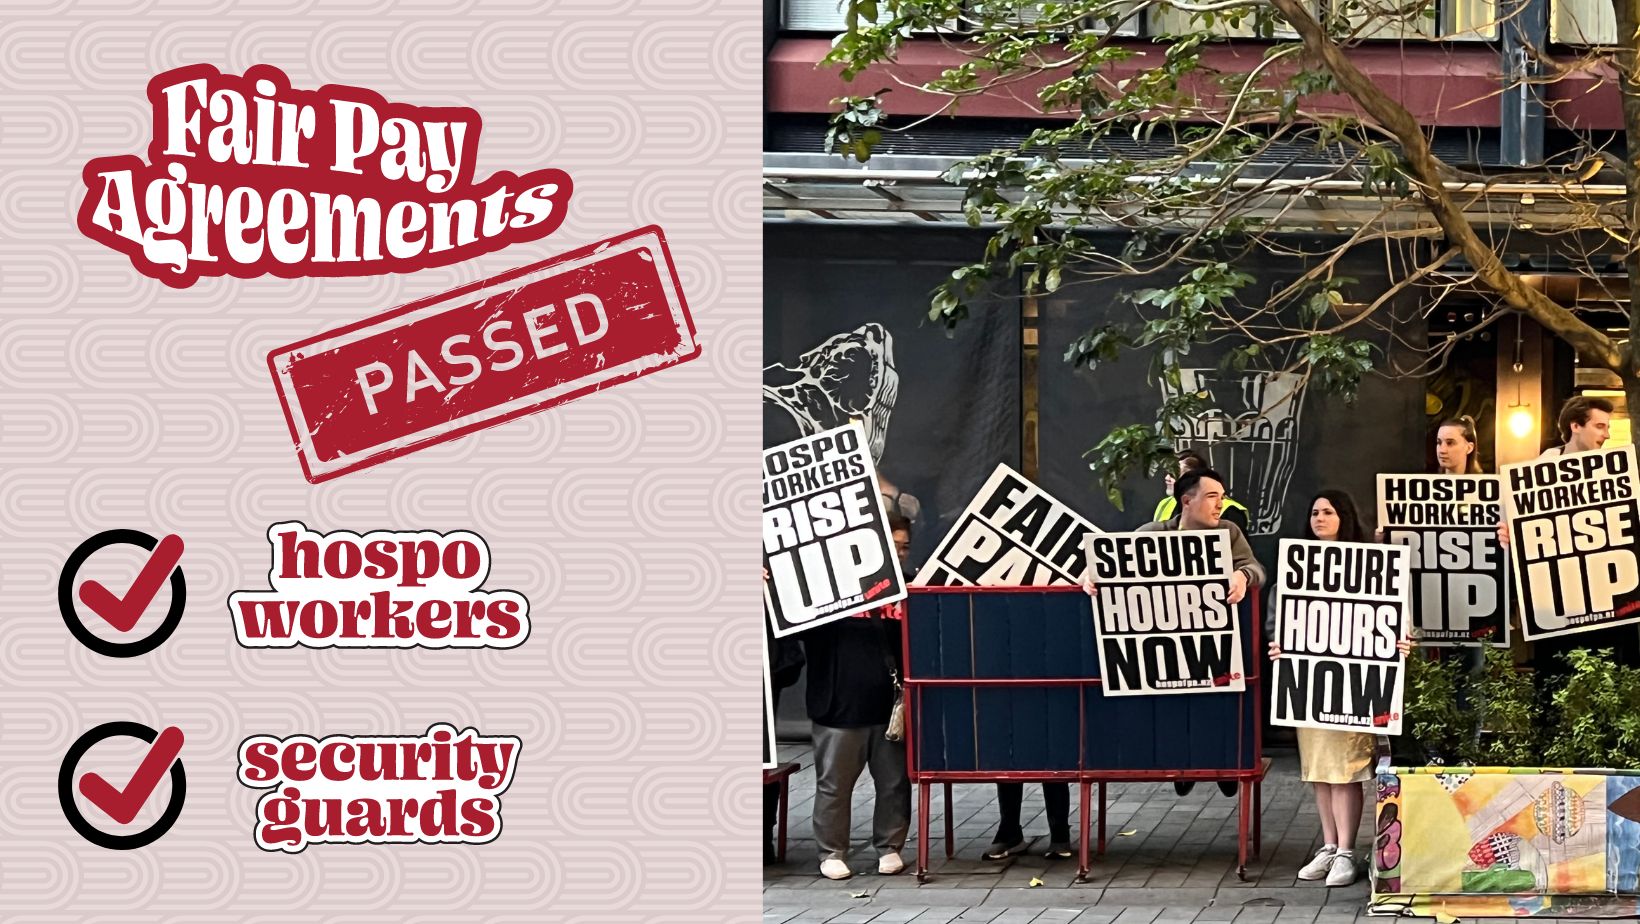 Fair Pay Agreements passed in hospo and security